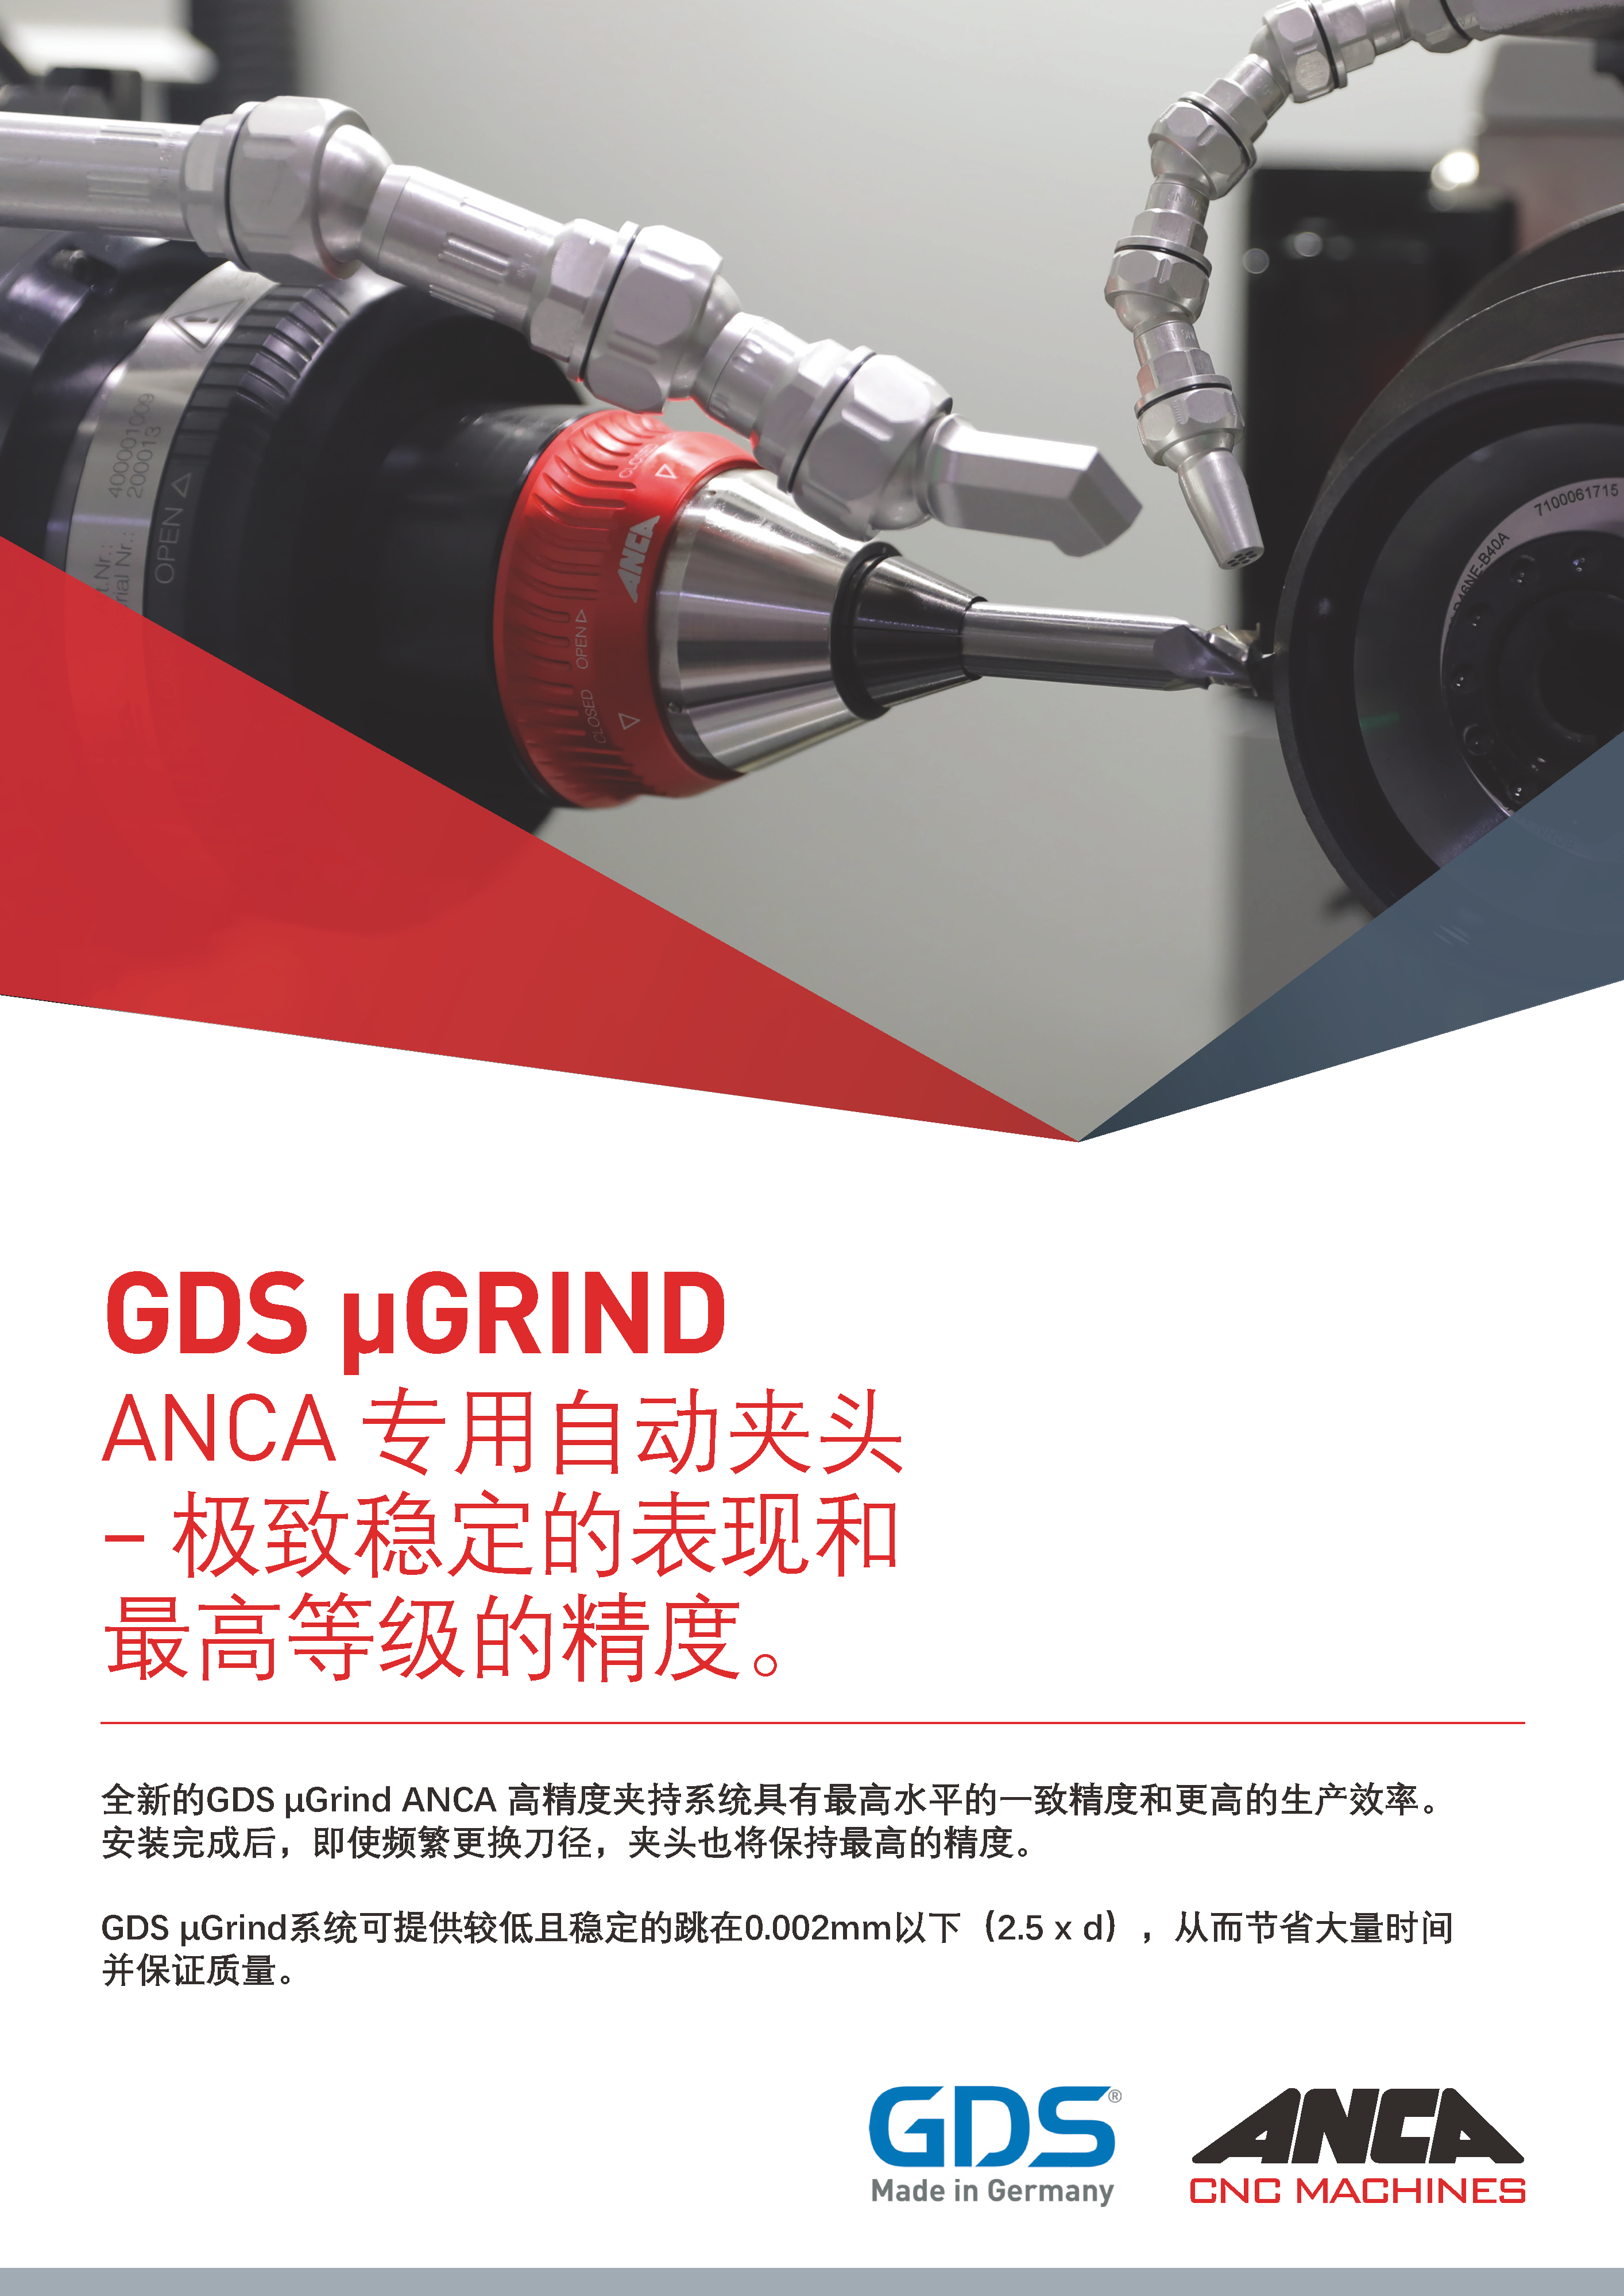 ANCA_GDS_Flyer 中文_页面_1.png